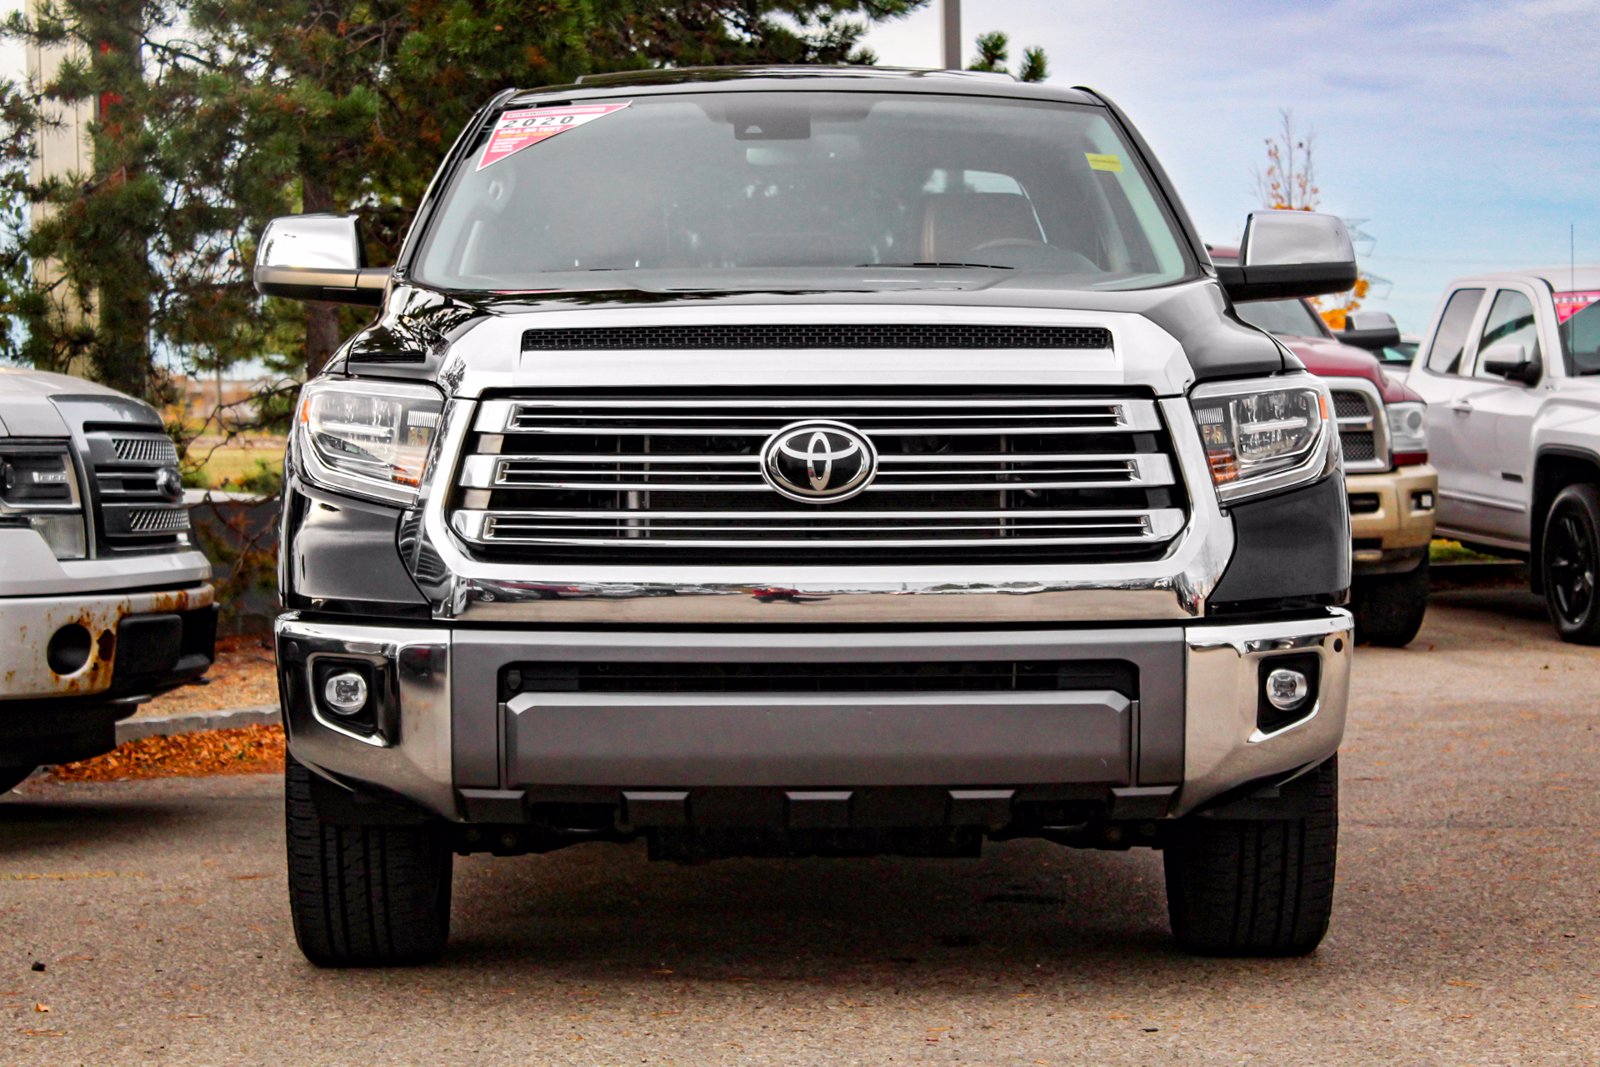 Certified Pre-Owned 2020 Toyota Tundra 1794 Edition 5.7L 4WD Crew Cab